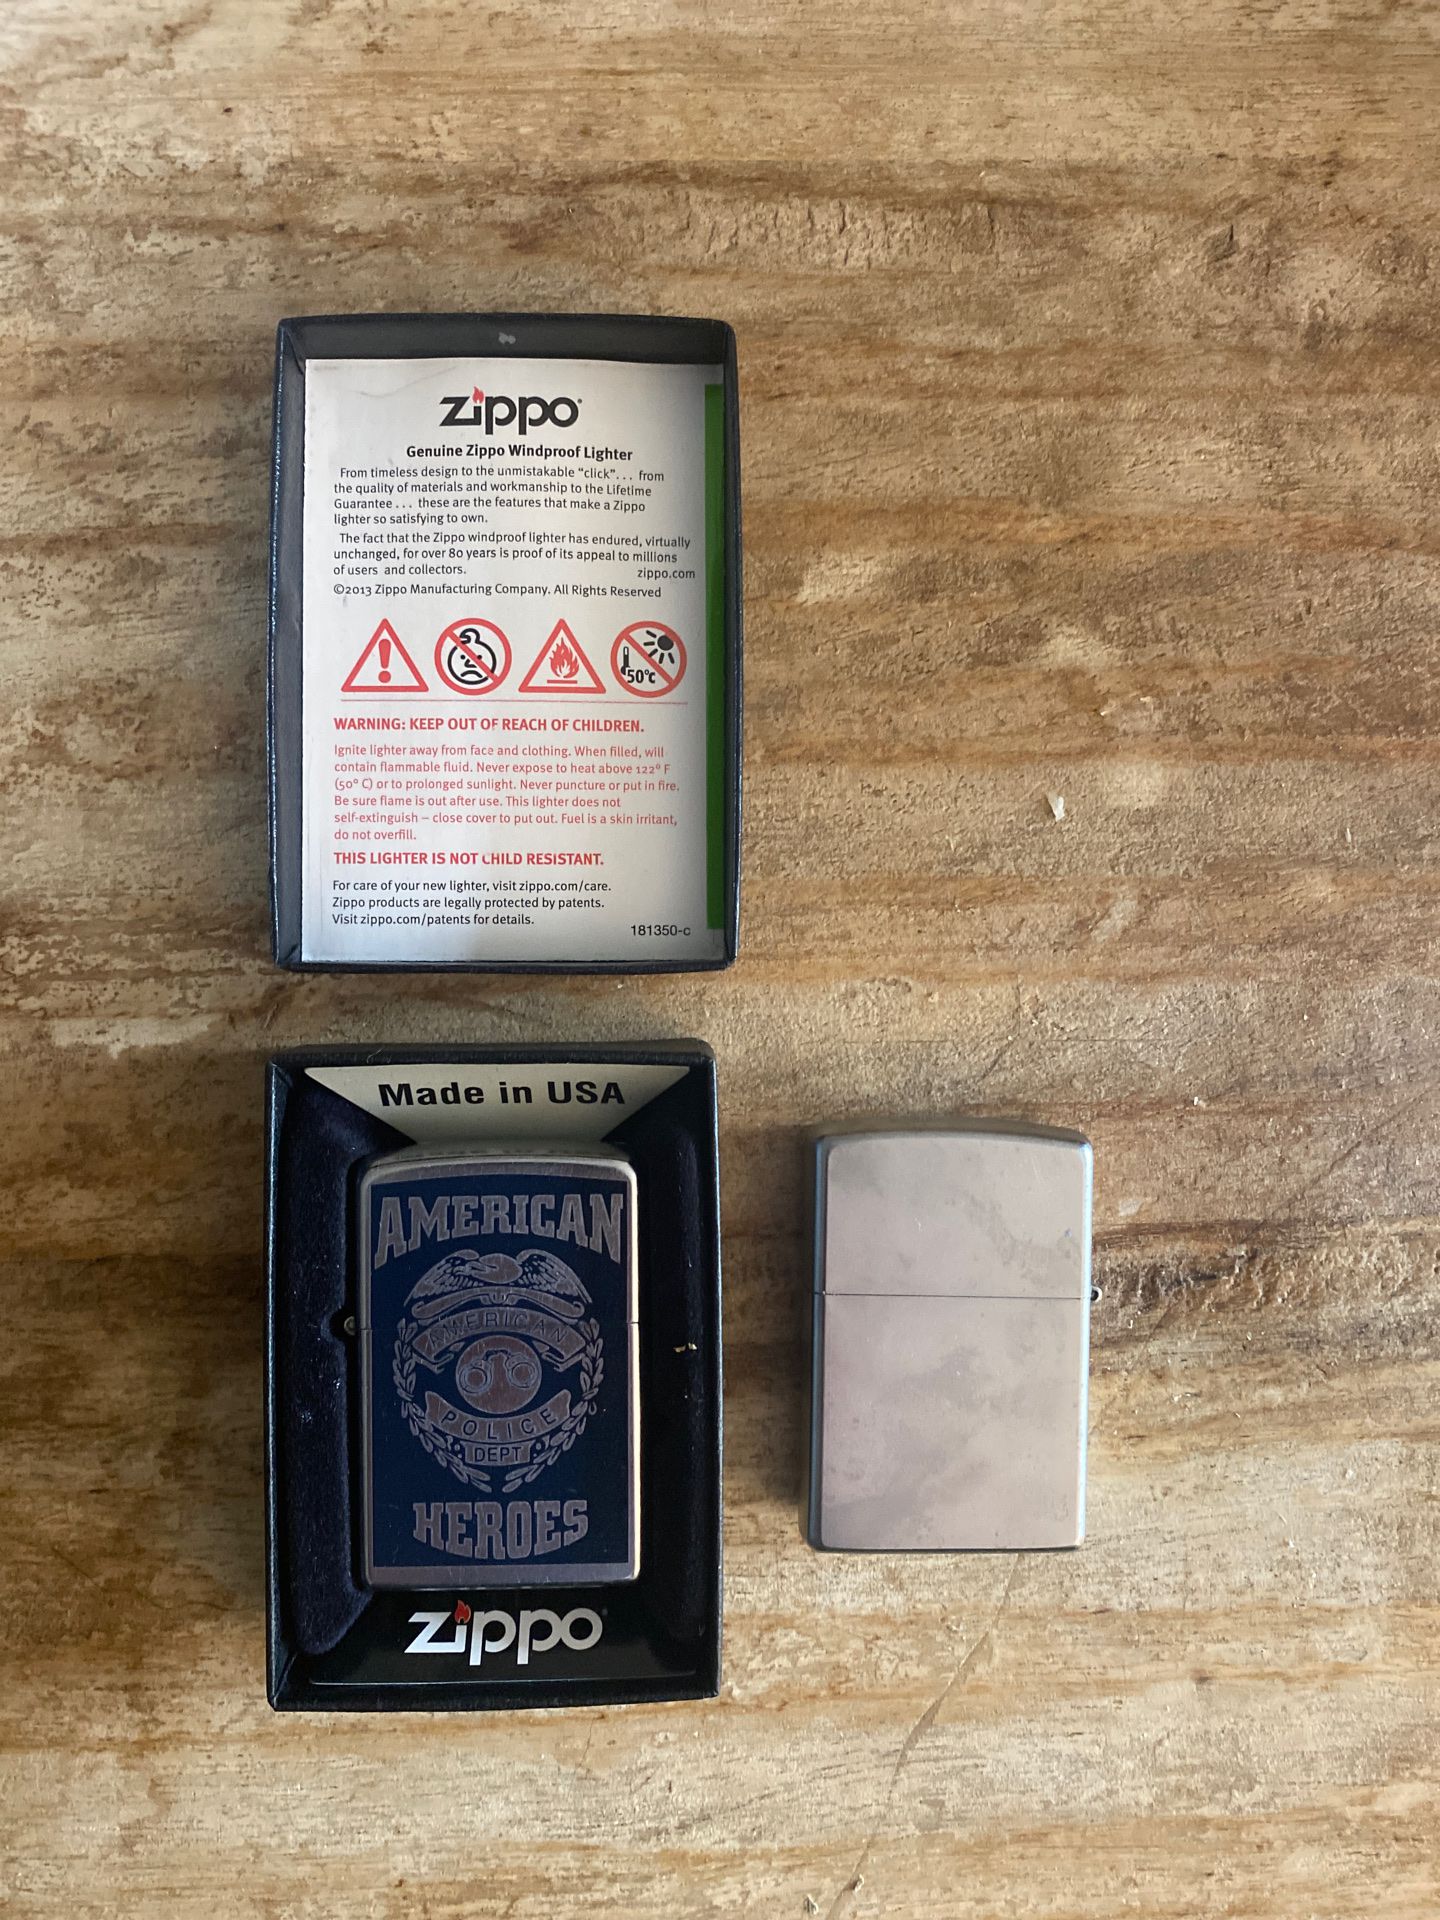 2 Zippo Lighter - one Special edition American hero’s